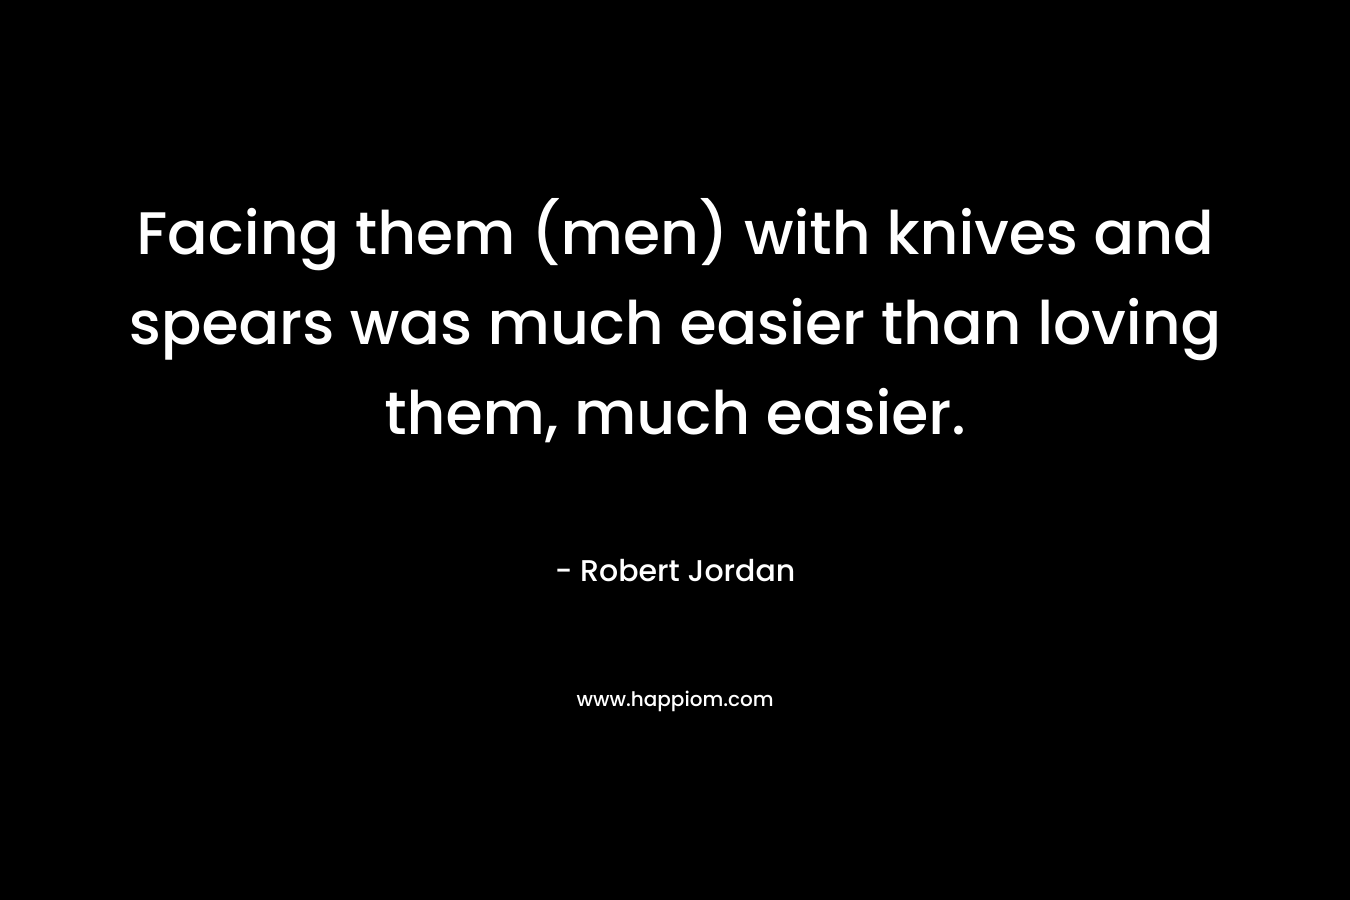 Facing them (men) with knives and spears was much easier than loving them, much easier. – Robert Jordan